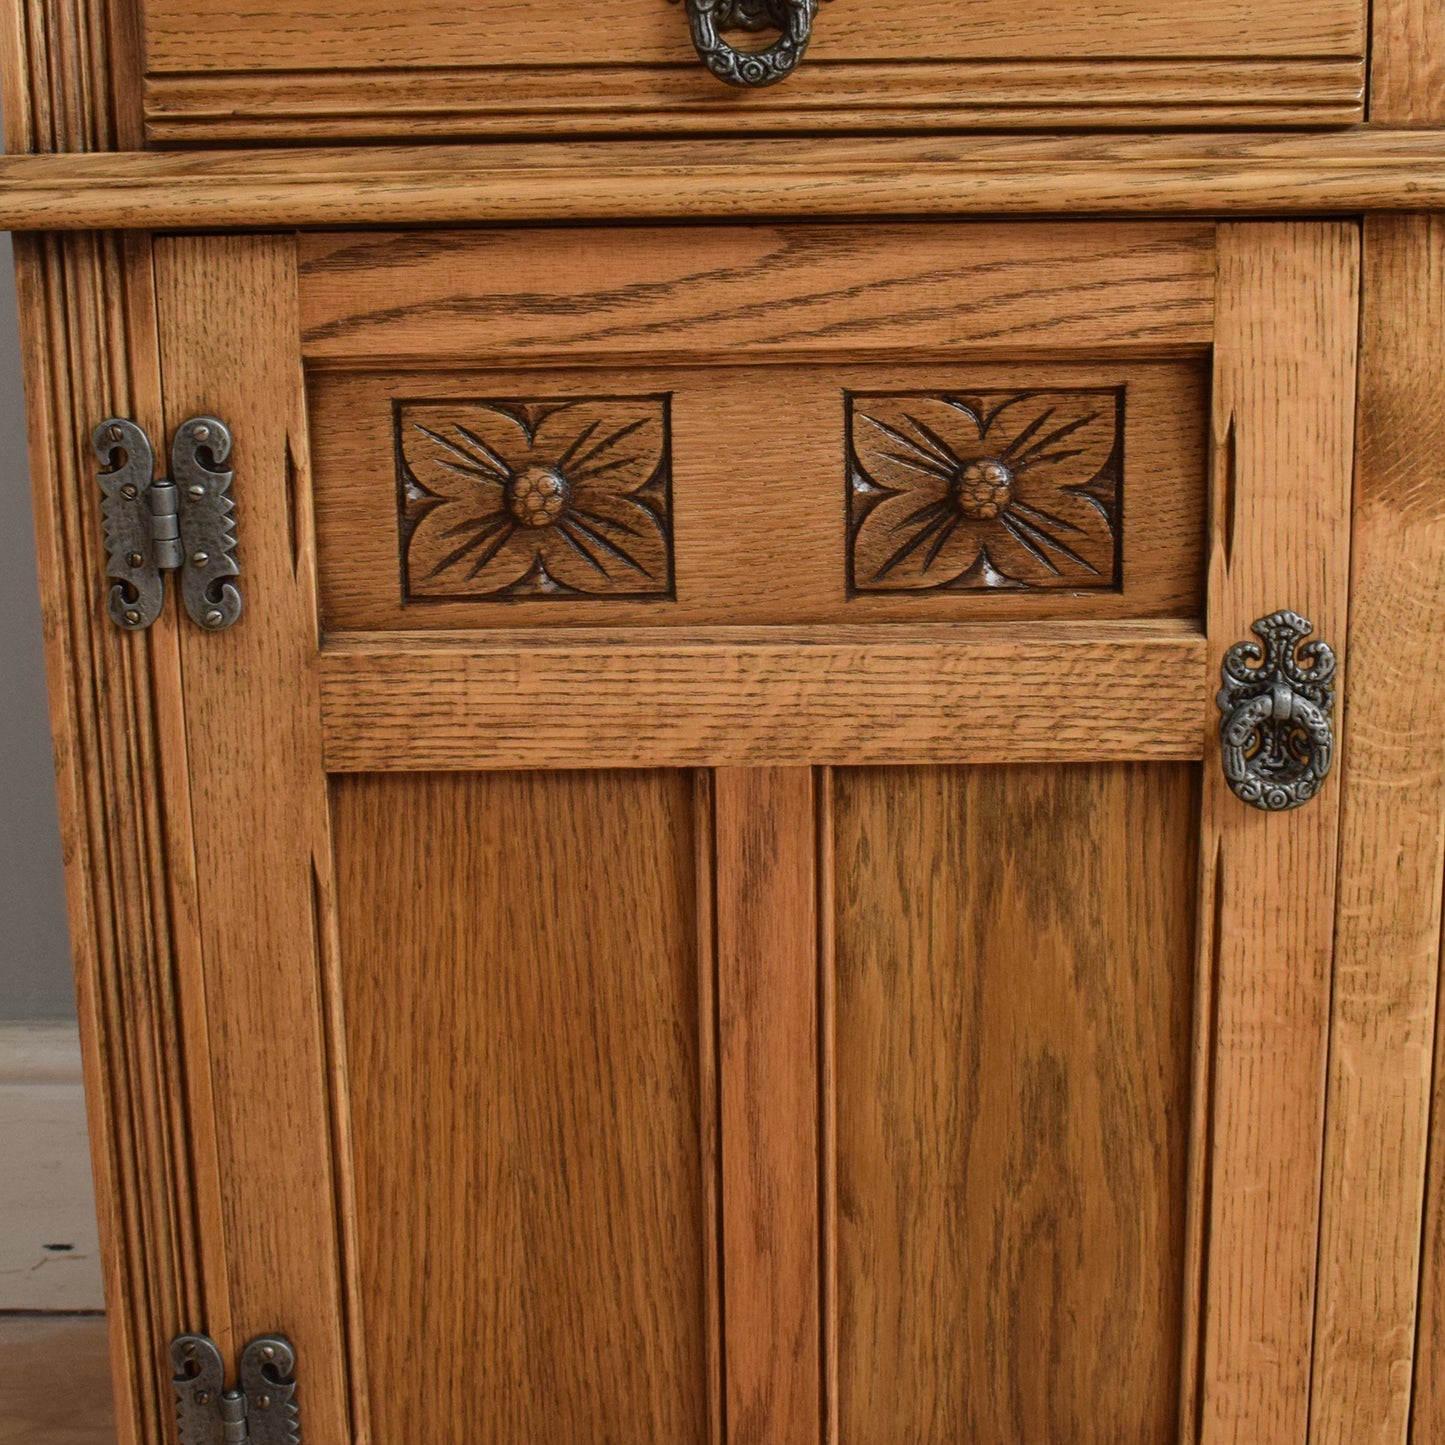 Traditional Old Charm Sideboard